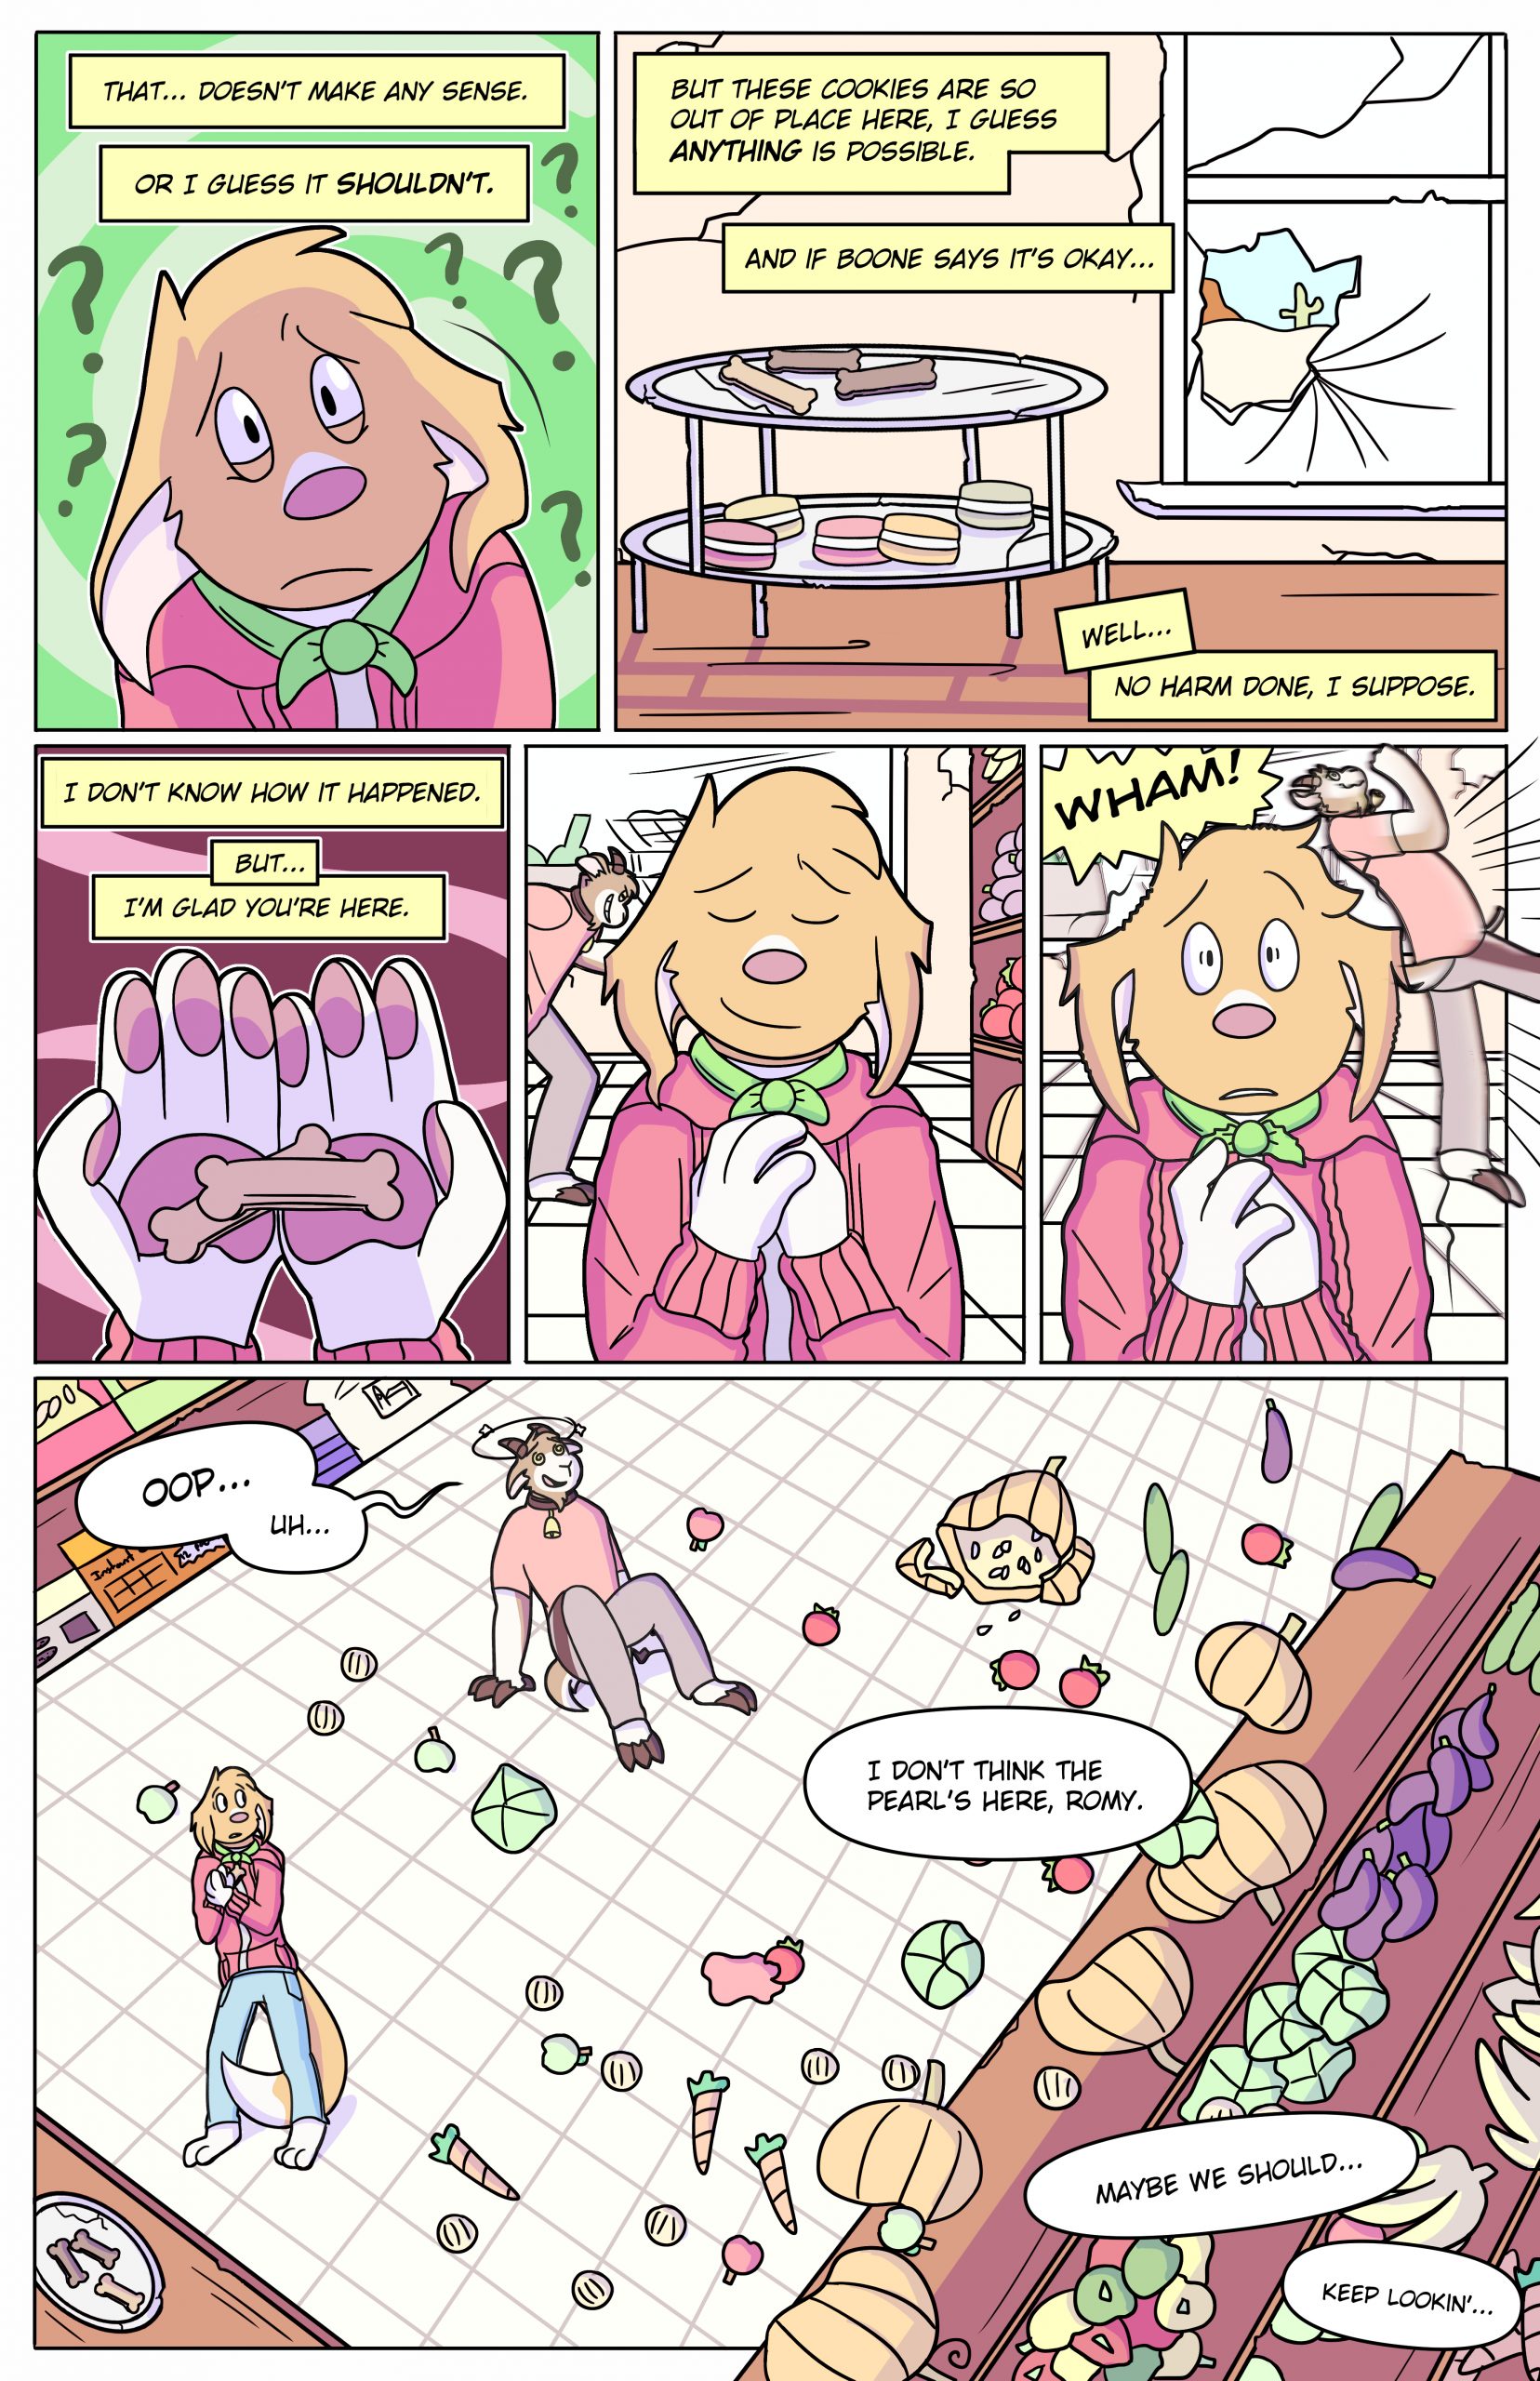 Page 1.45: Cleanup on Aisle 3